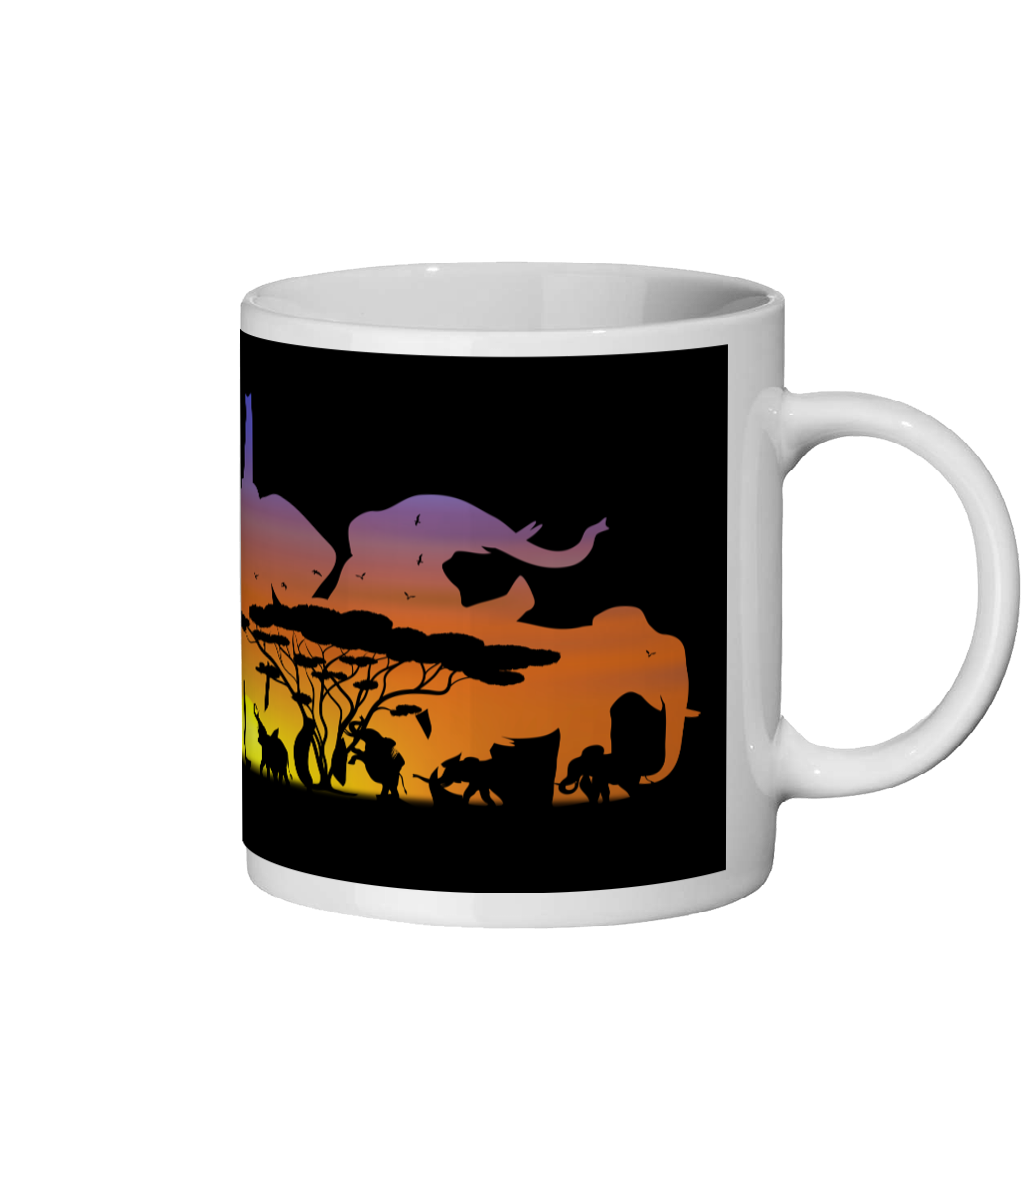 EXCLUSIVE African Elephant Ceramic Mug - FAST UK DELIVERY